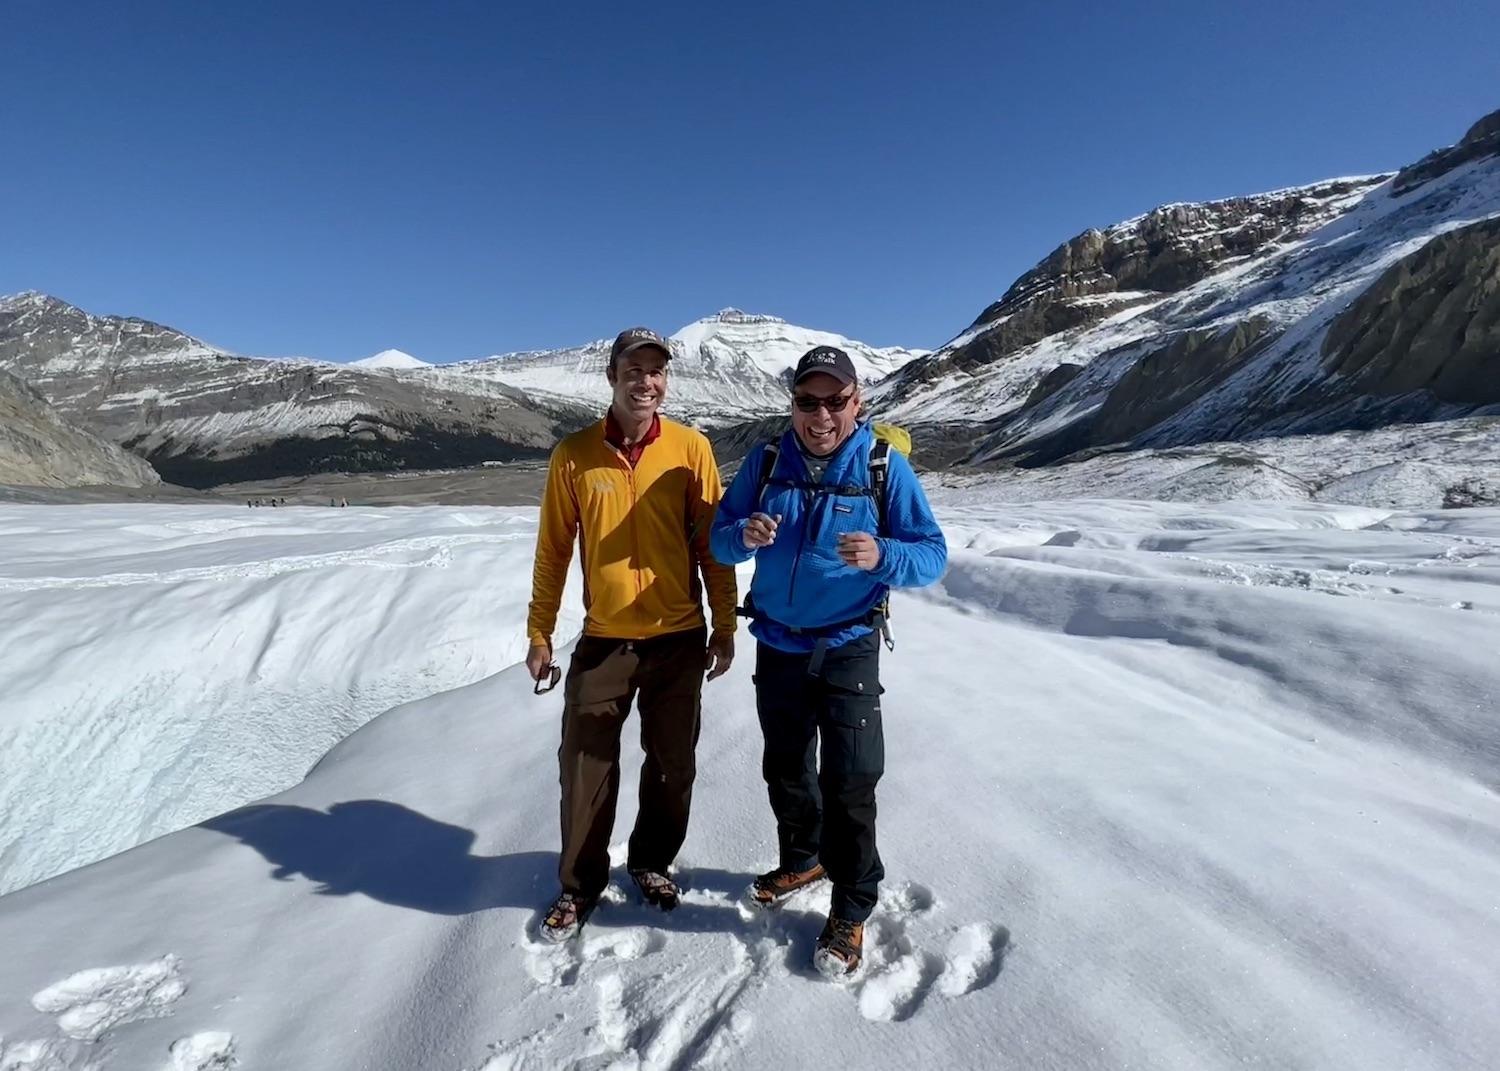 IceWalk's Corin Lohmann and Zucmin Guiding's Tim Patterson stand on the Athabasca Glacier in Jasper National Park, Alberta.